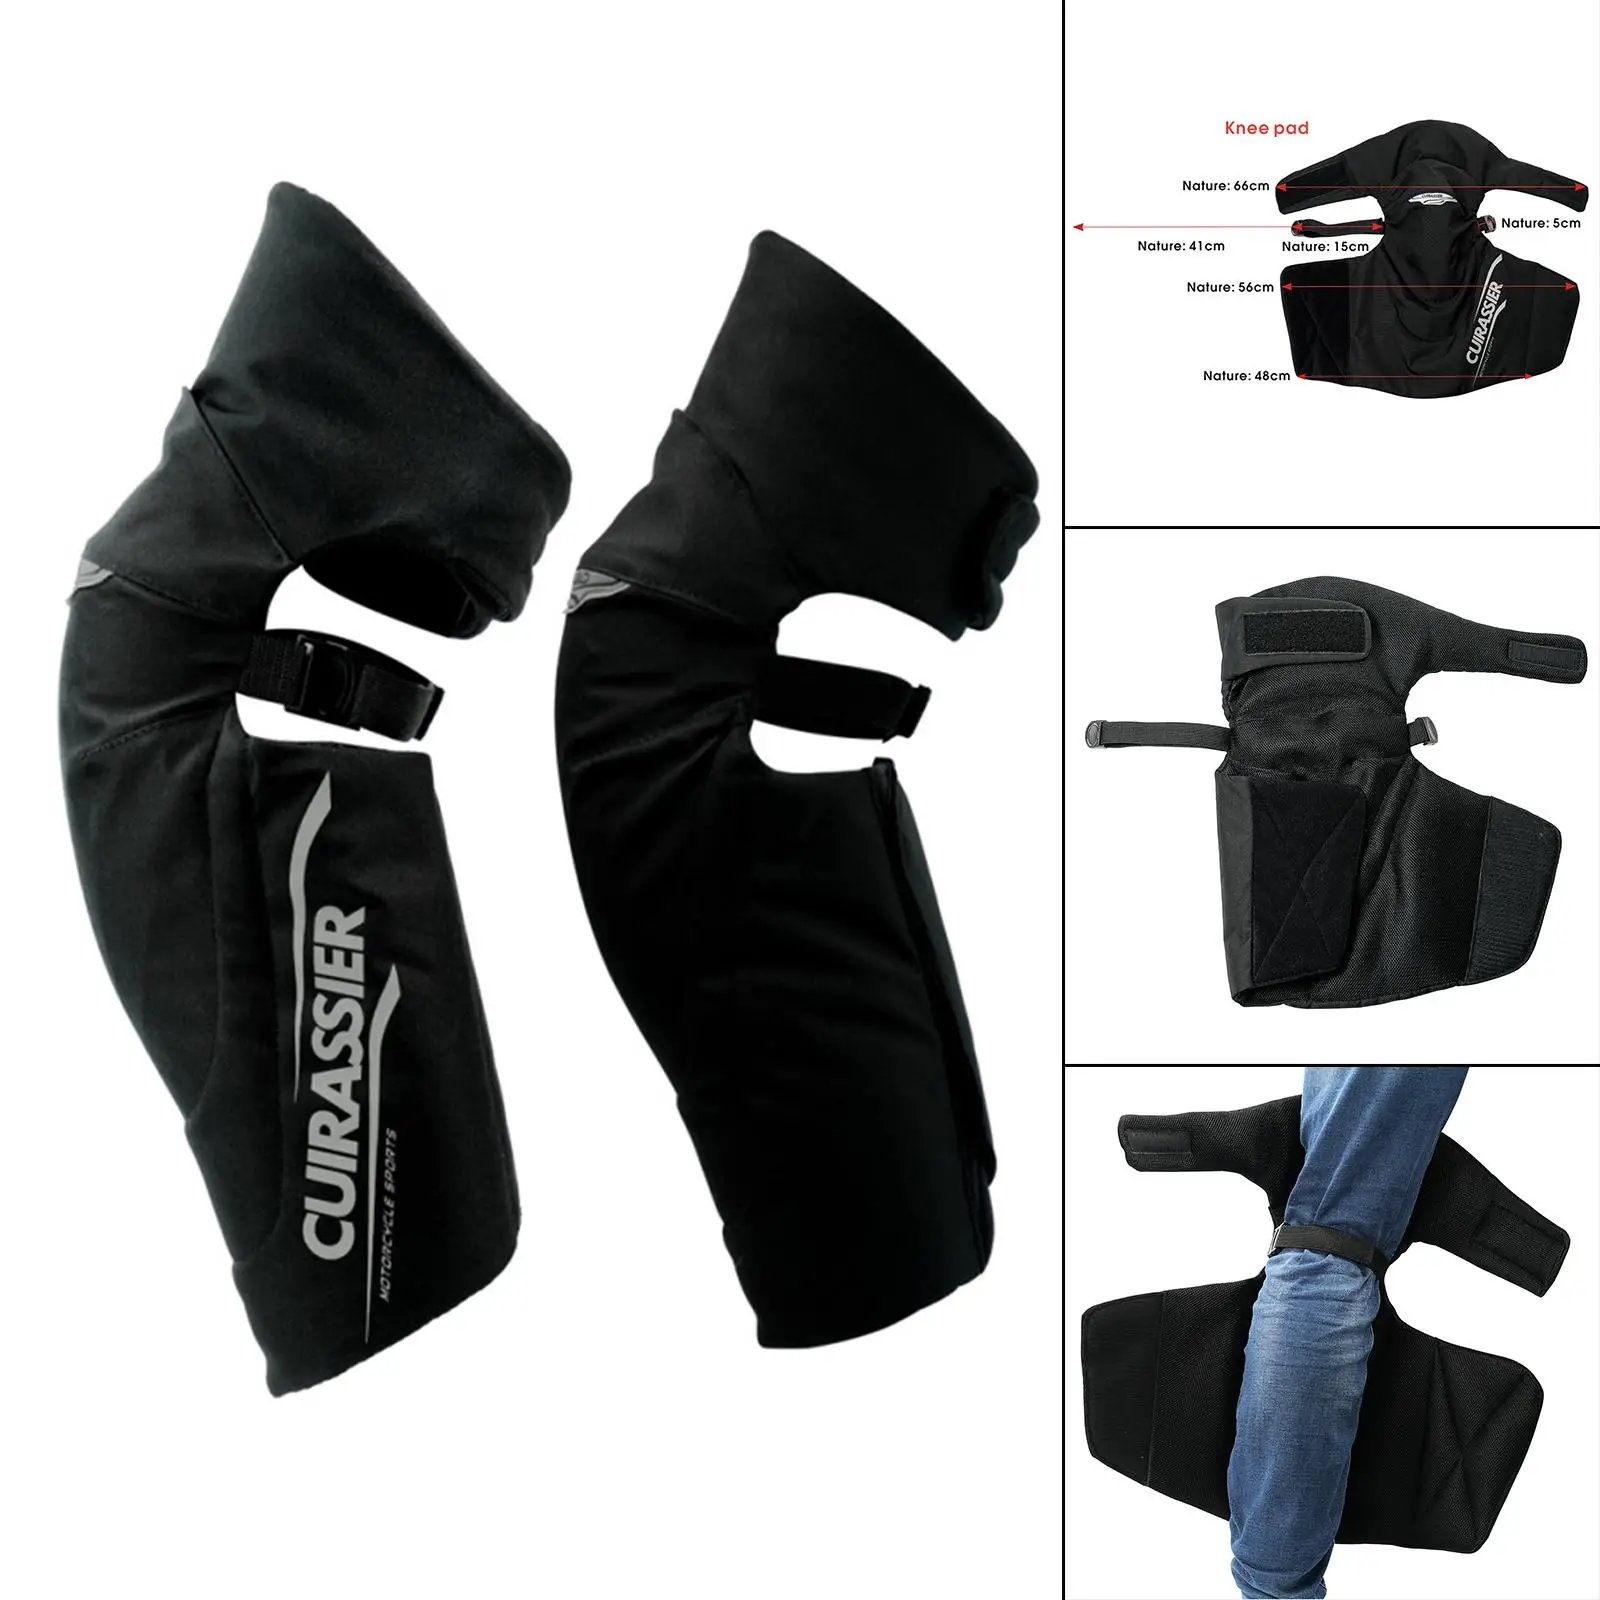 Motorcycle Knee Pads Guards Oxford Cloth Gaiter Fit for Motocross Cycling